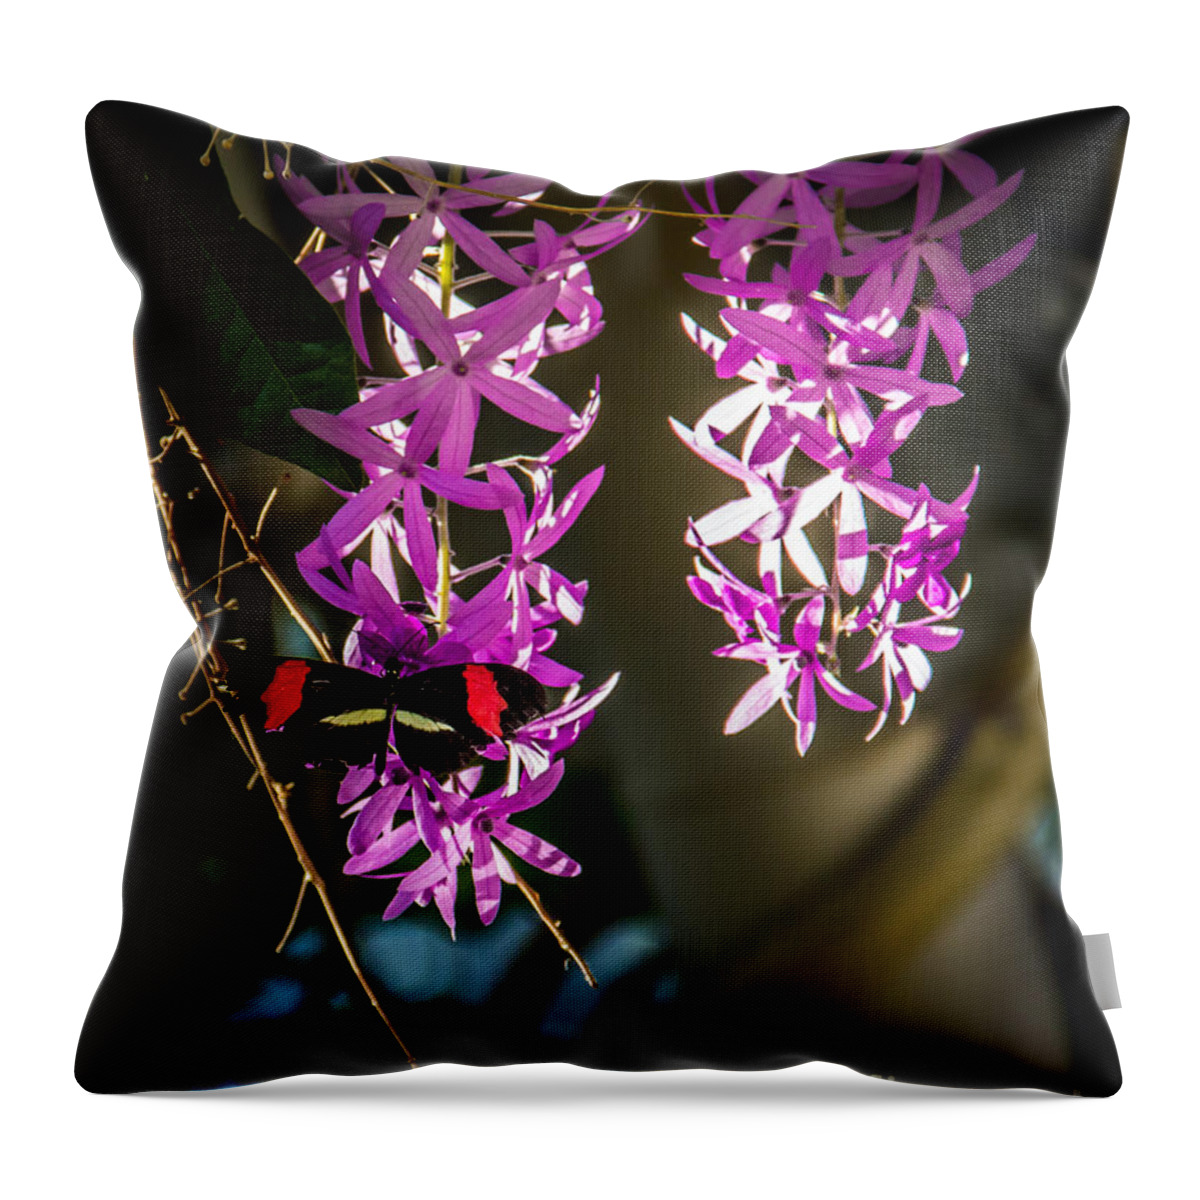 Butterfly Throw Pillow featuring the photograph Butterfly 4 by Perry Webster